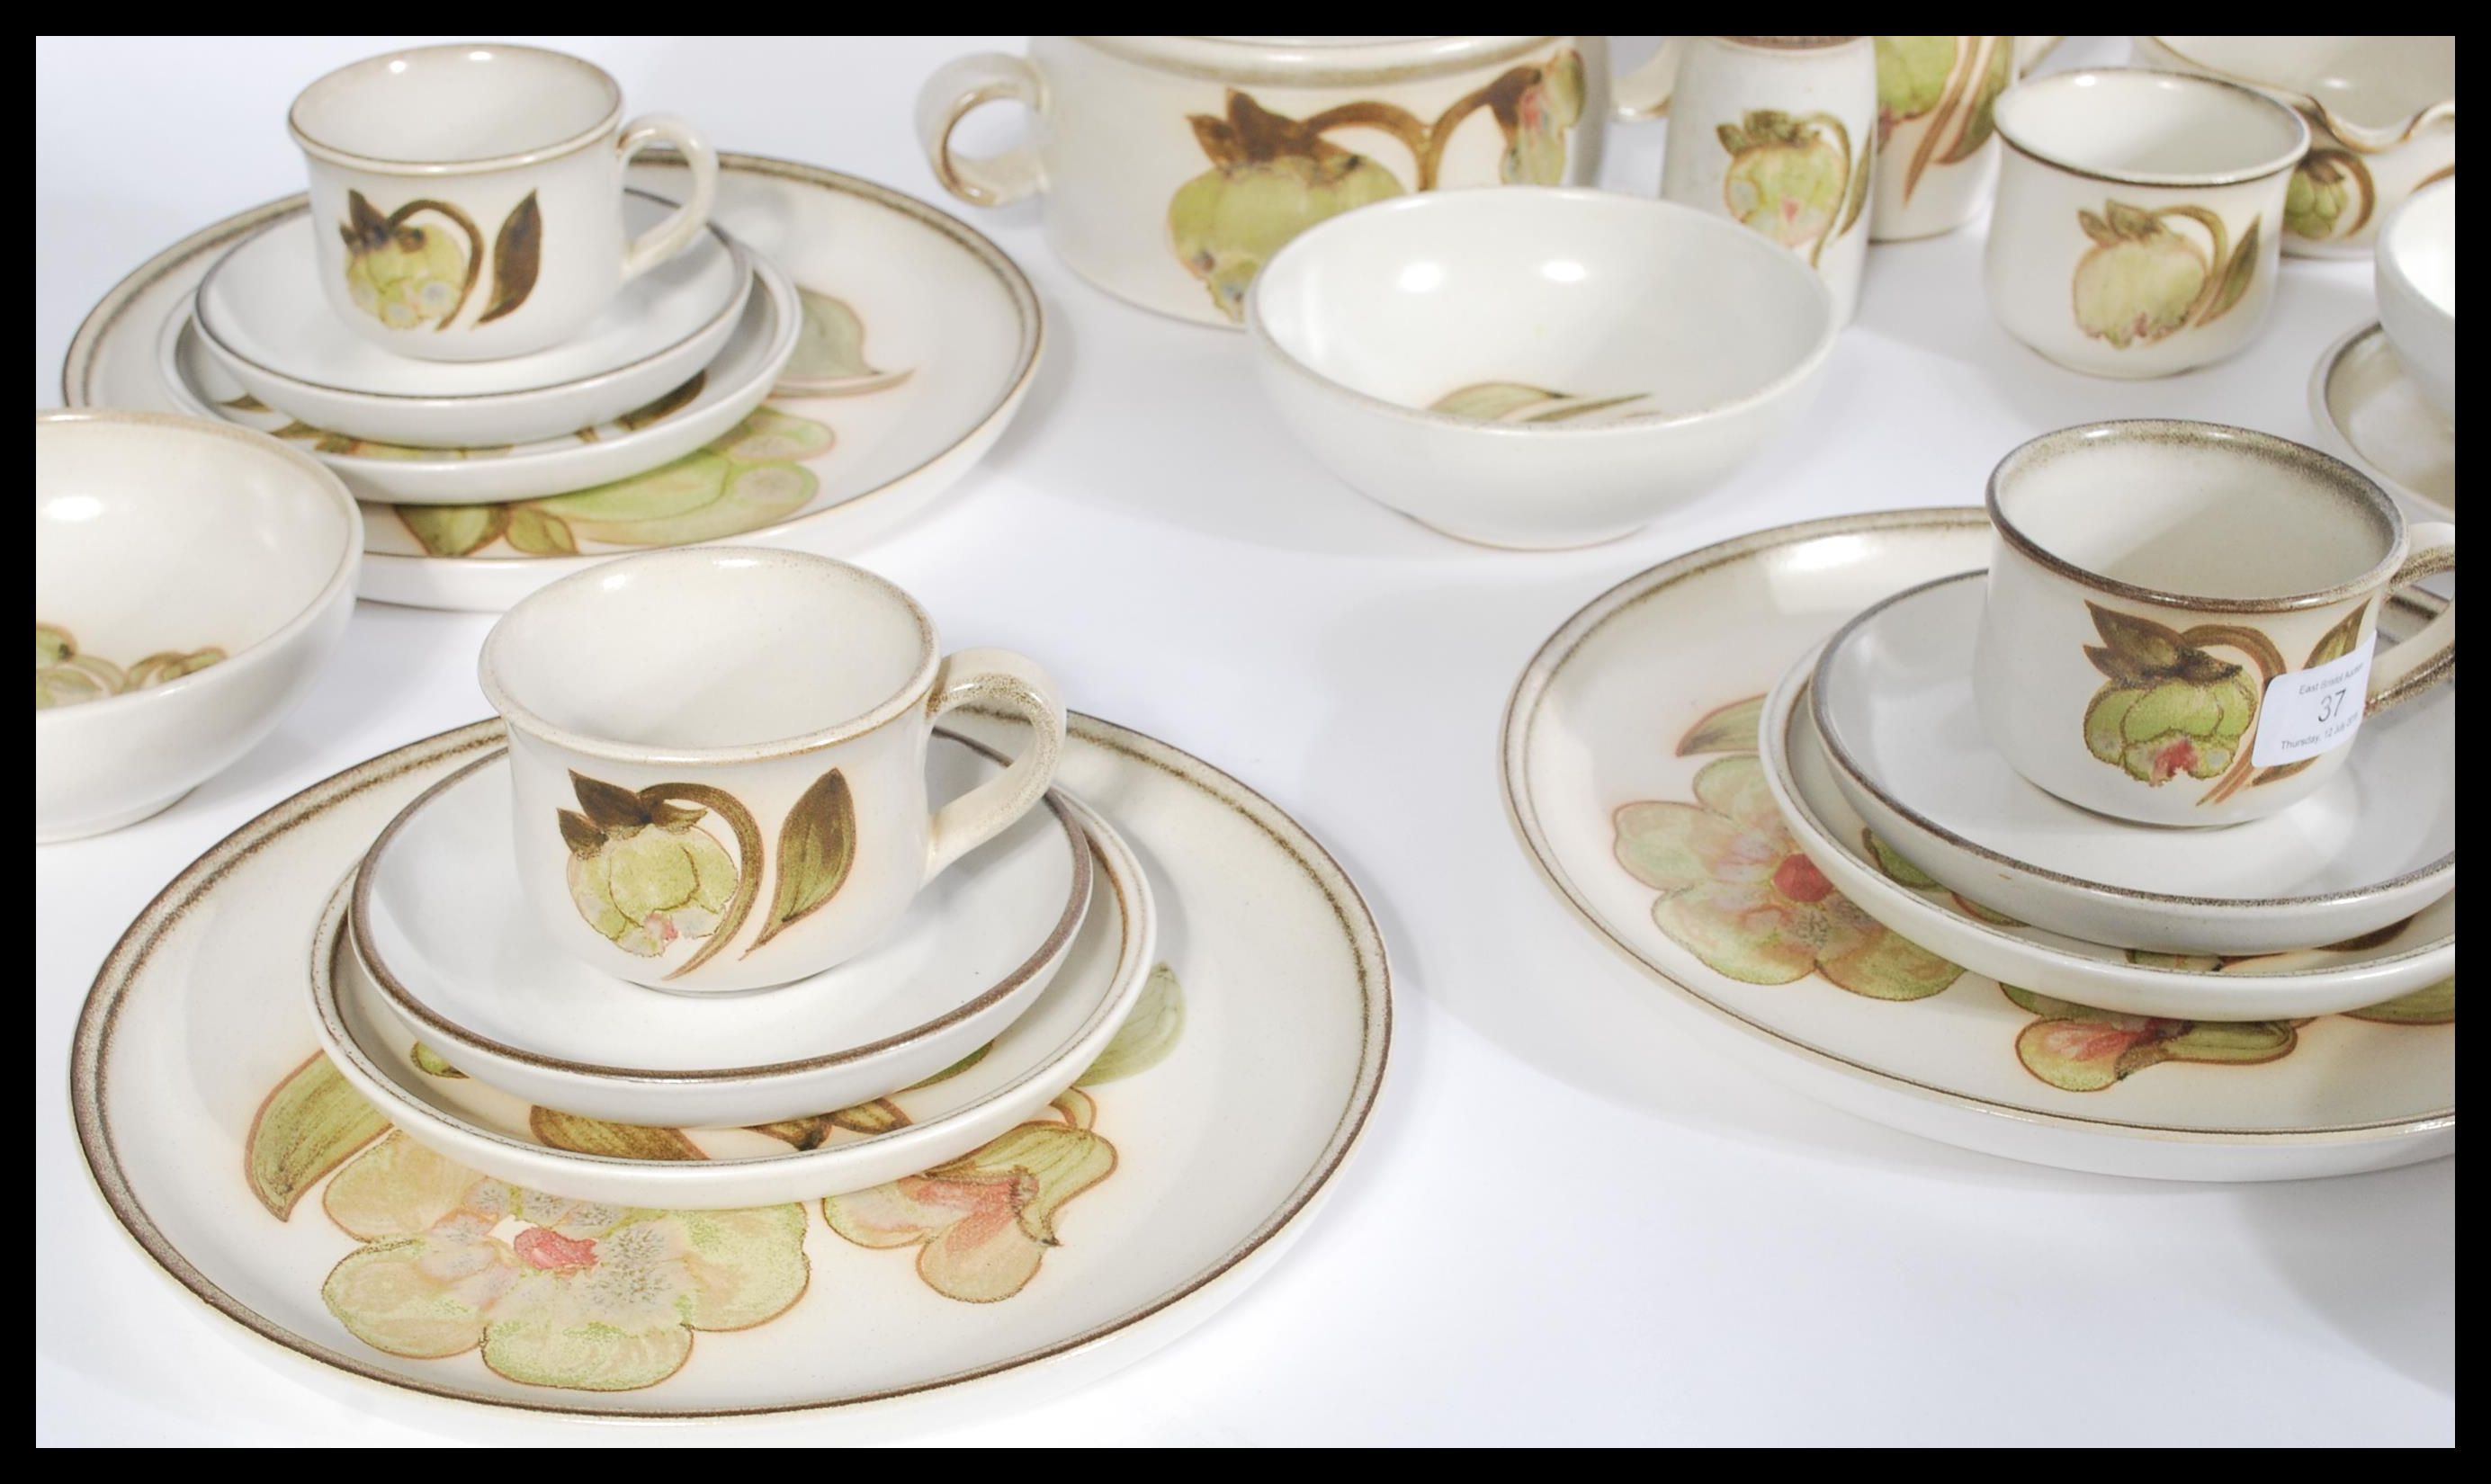 A vintage 20th century stoneware dinner service in - Image 7 of 8